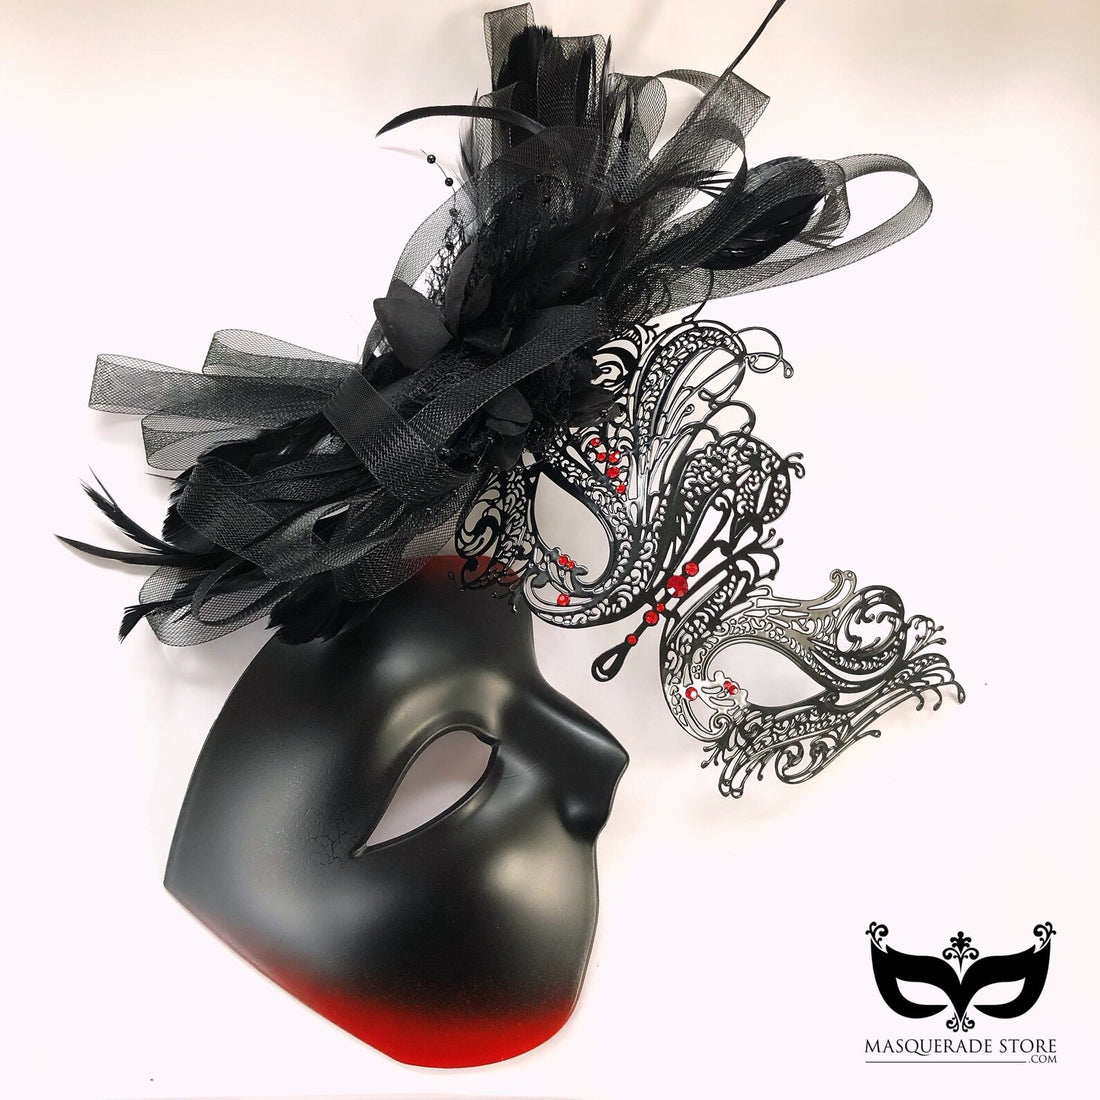 Black metal mask with red rhinestones and black feathers. Black/red ombre phantom mask.